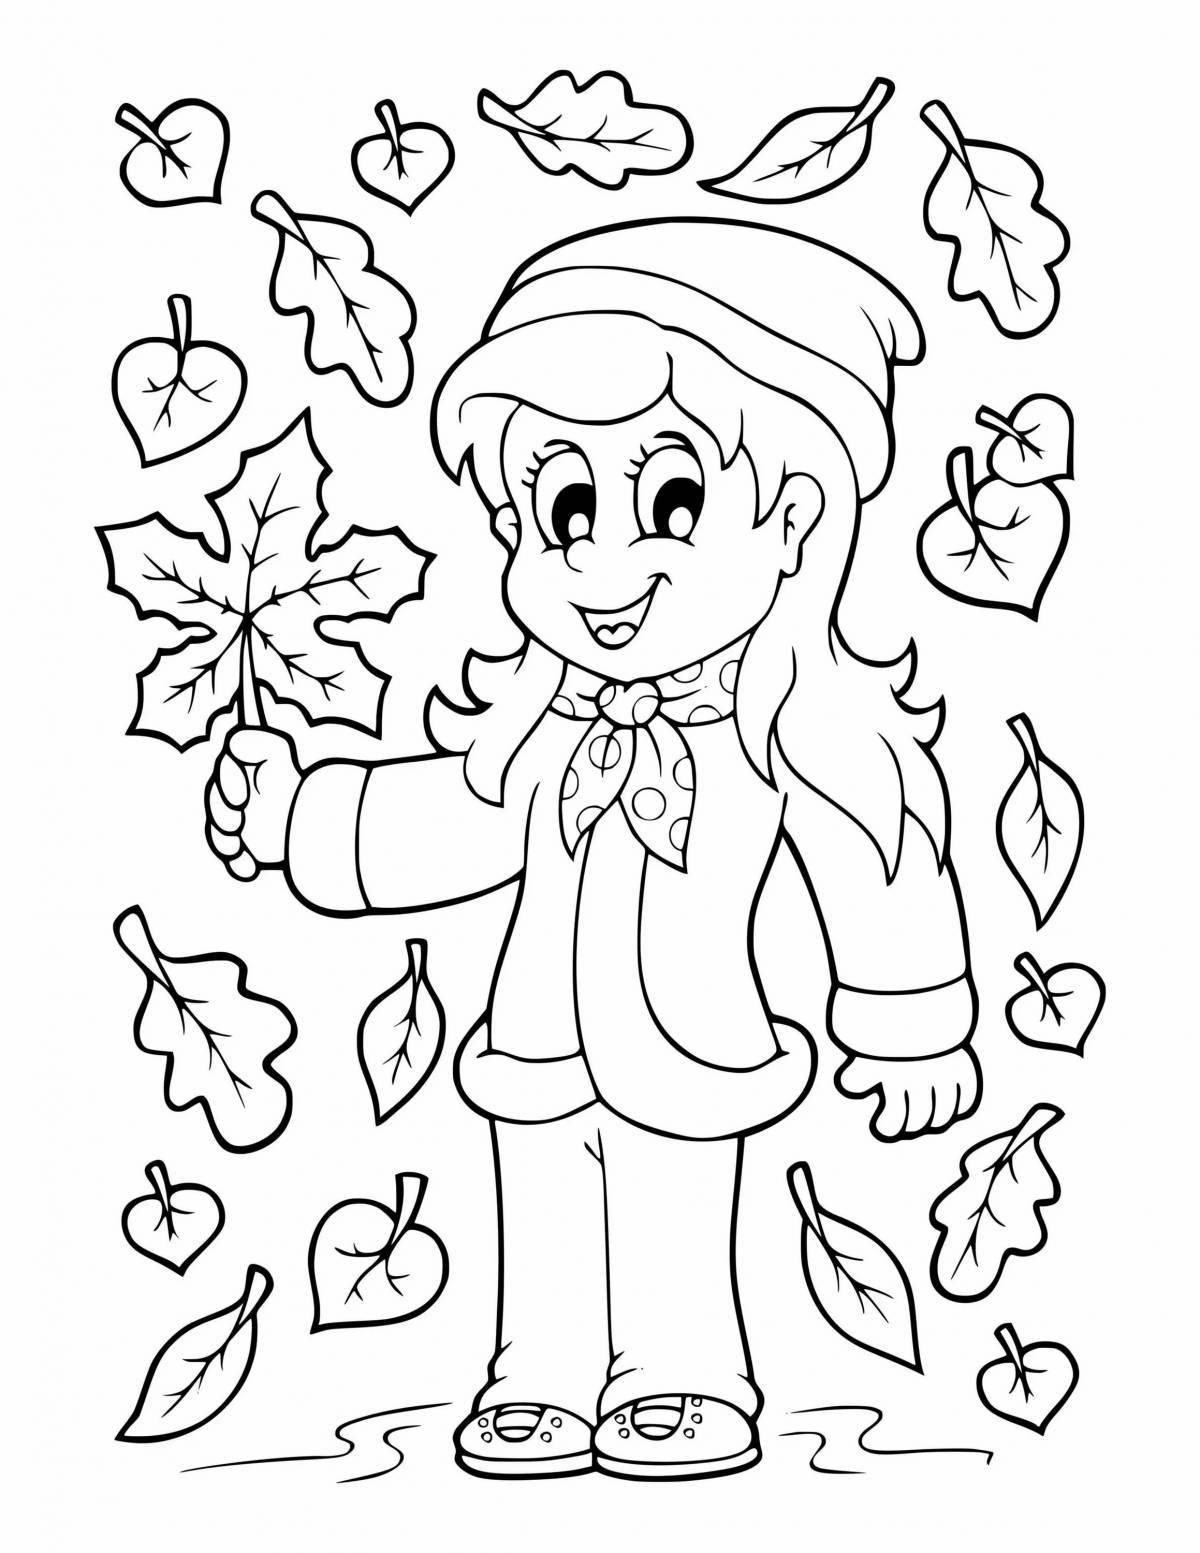 Coloring book glowing autumn girl